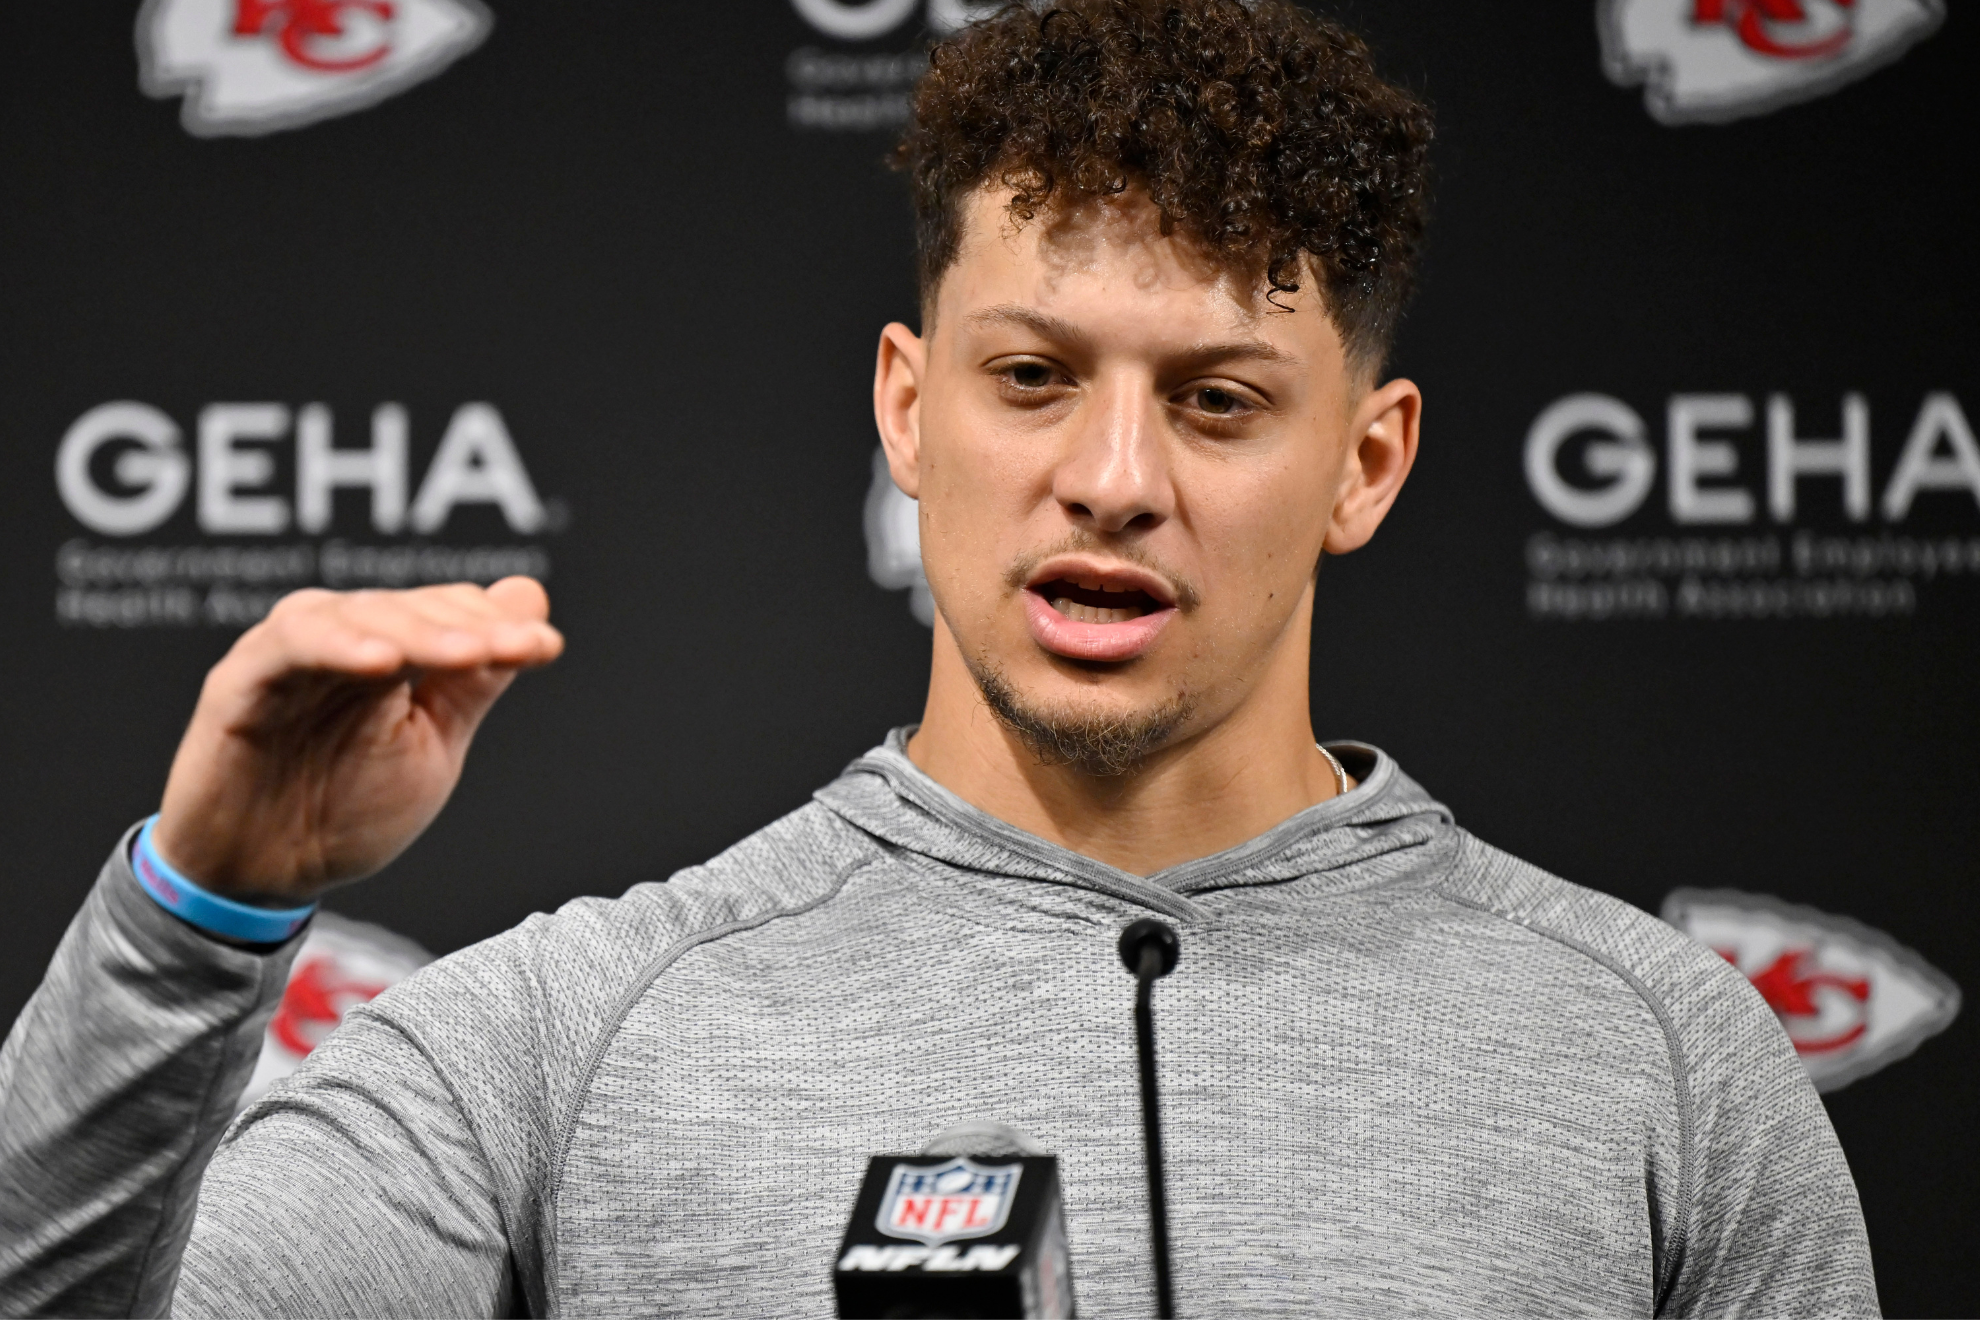 The rest of the regular-season schedule could bring good news for Mahomes and the Chiefs.